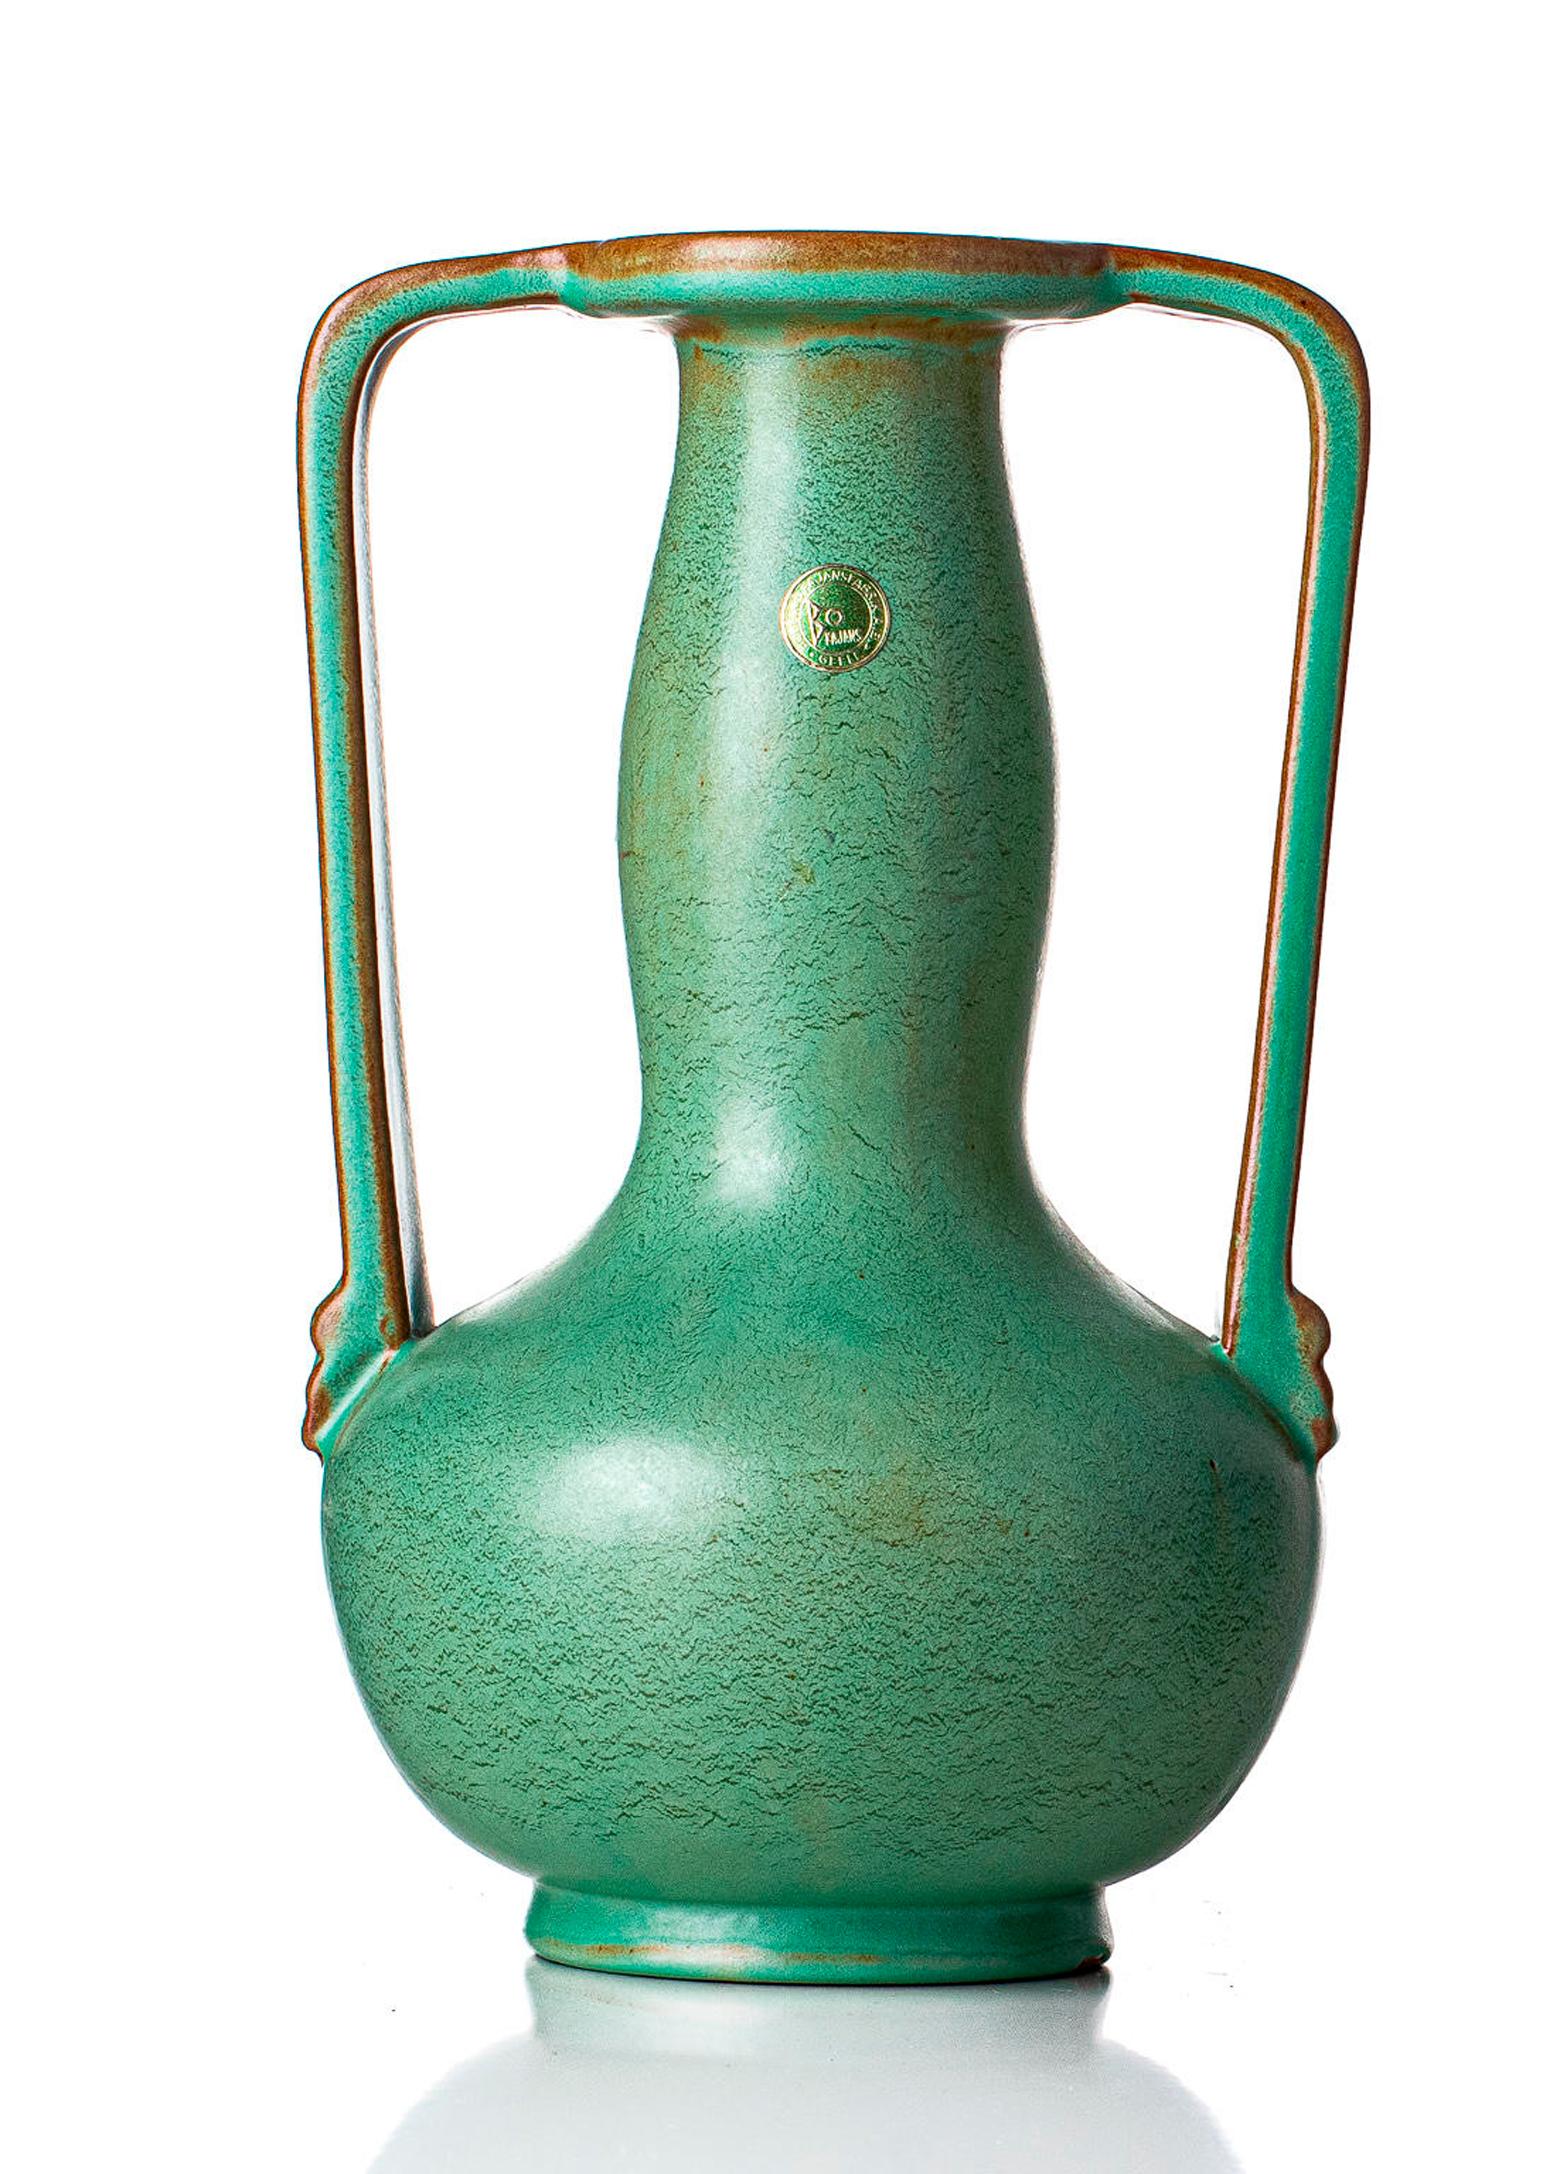 Ewald Dahlskog (1894-1950) ceramic vase produced by Bobergs Fajansfabrik. Marked M/D242-32. The number referring to the color; Celadon. The two marks at the base is derived from the manufacturing process.